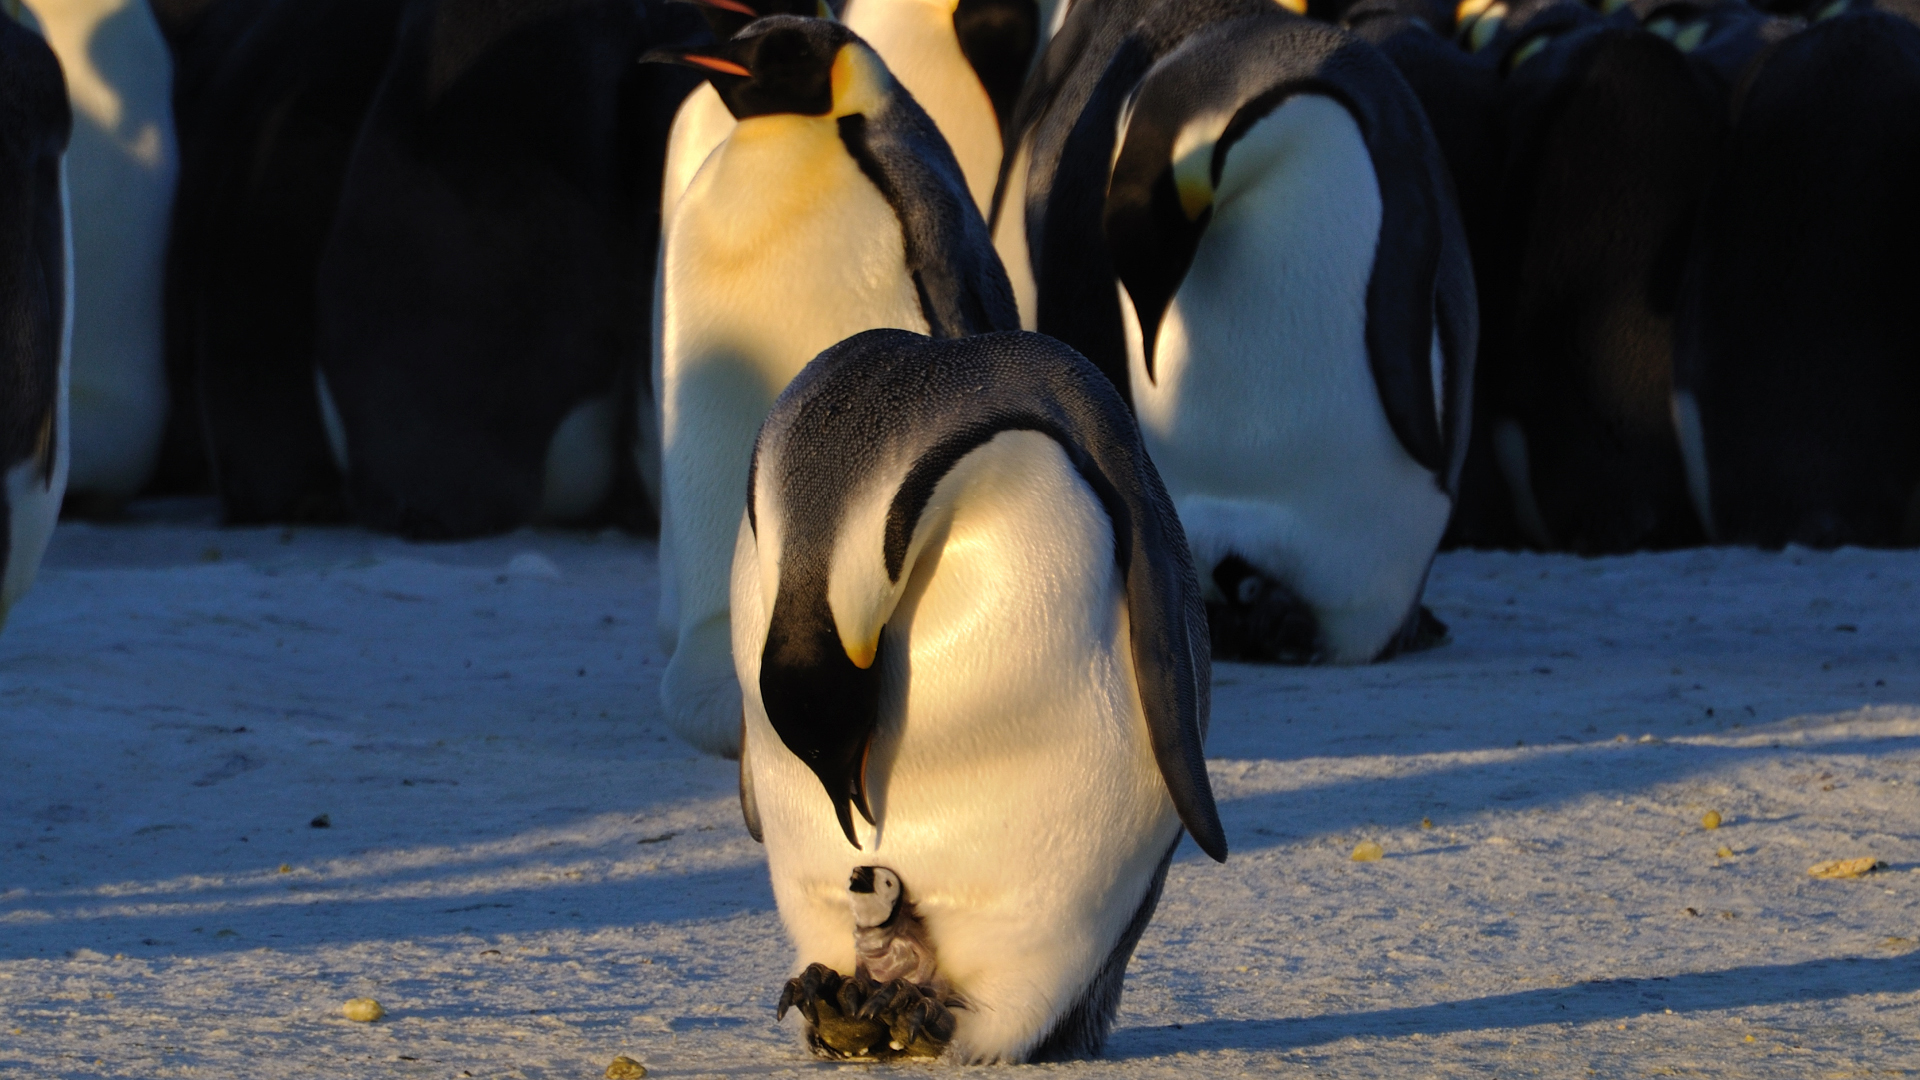 Emperor penguin bending down to a chick between the feet and a huddle of penguins keeping warm behind